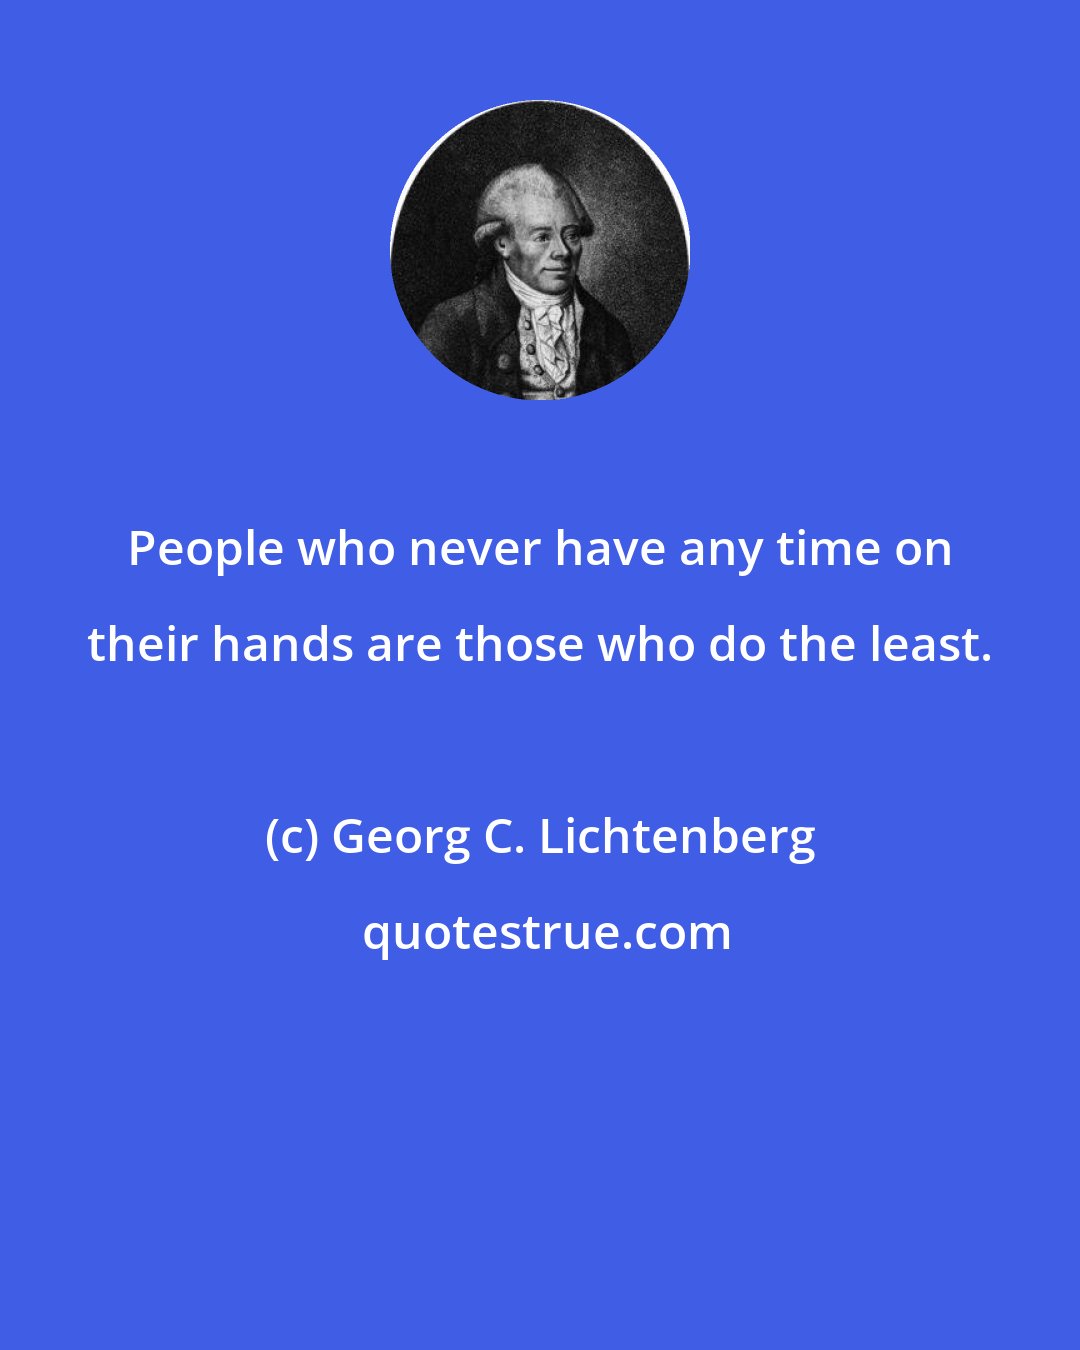 Georg C. Lichtenberg: People who never have any time on their hands are those who do the least.